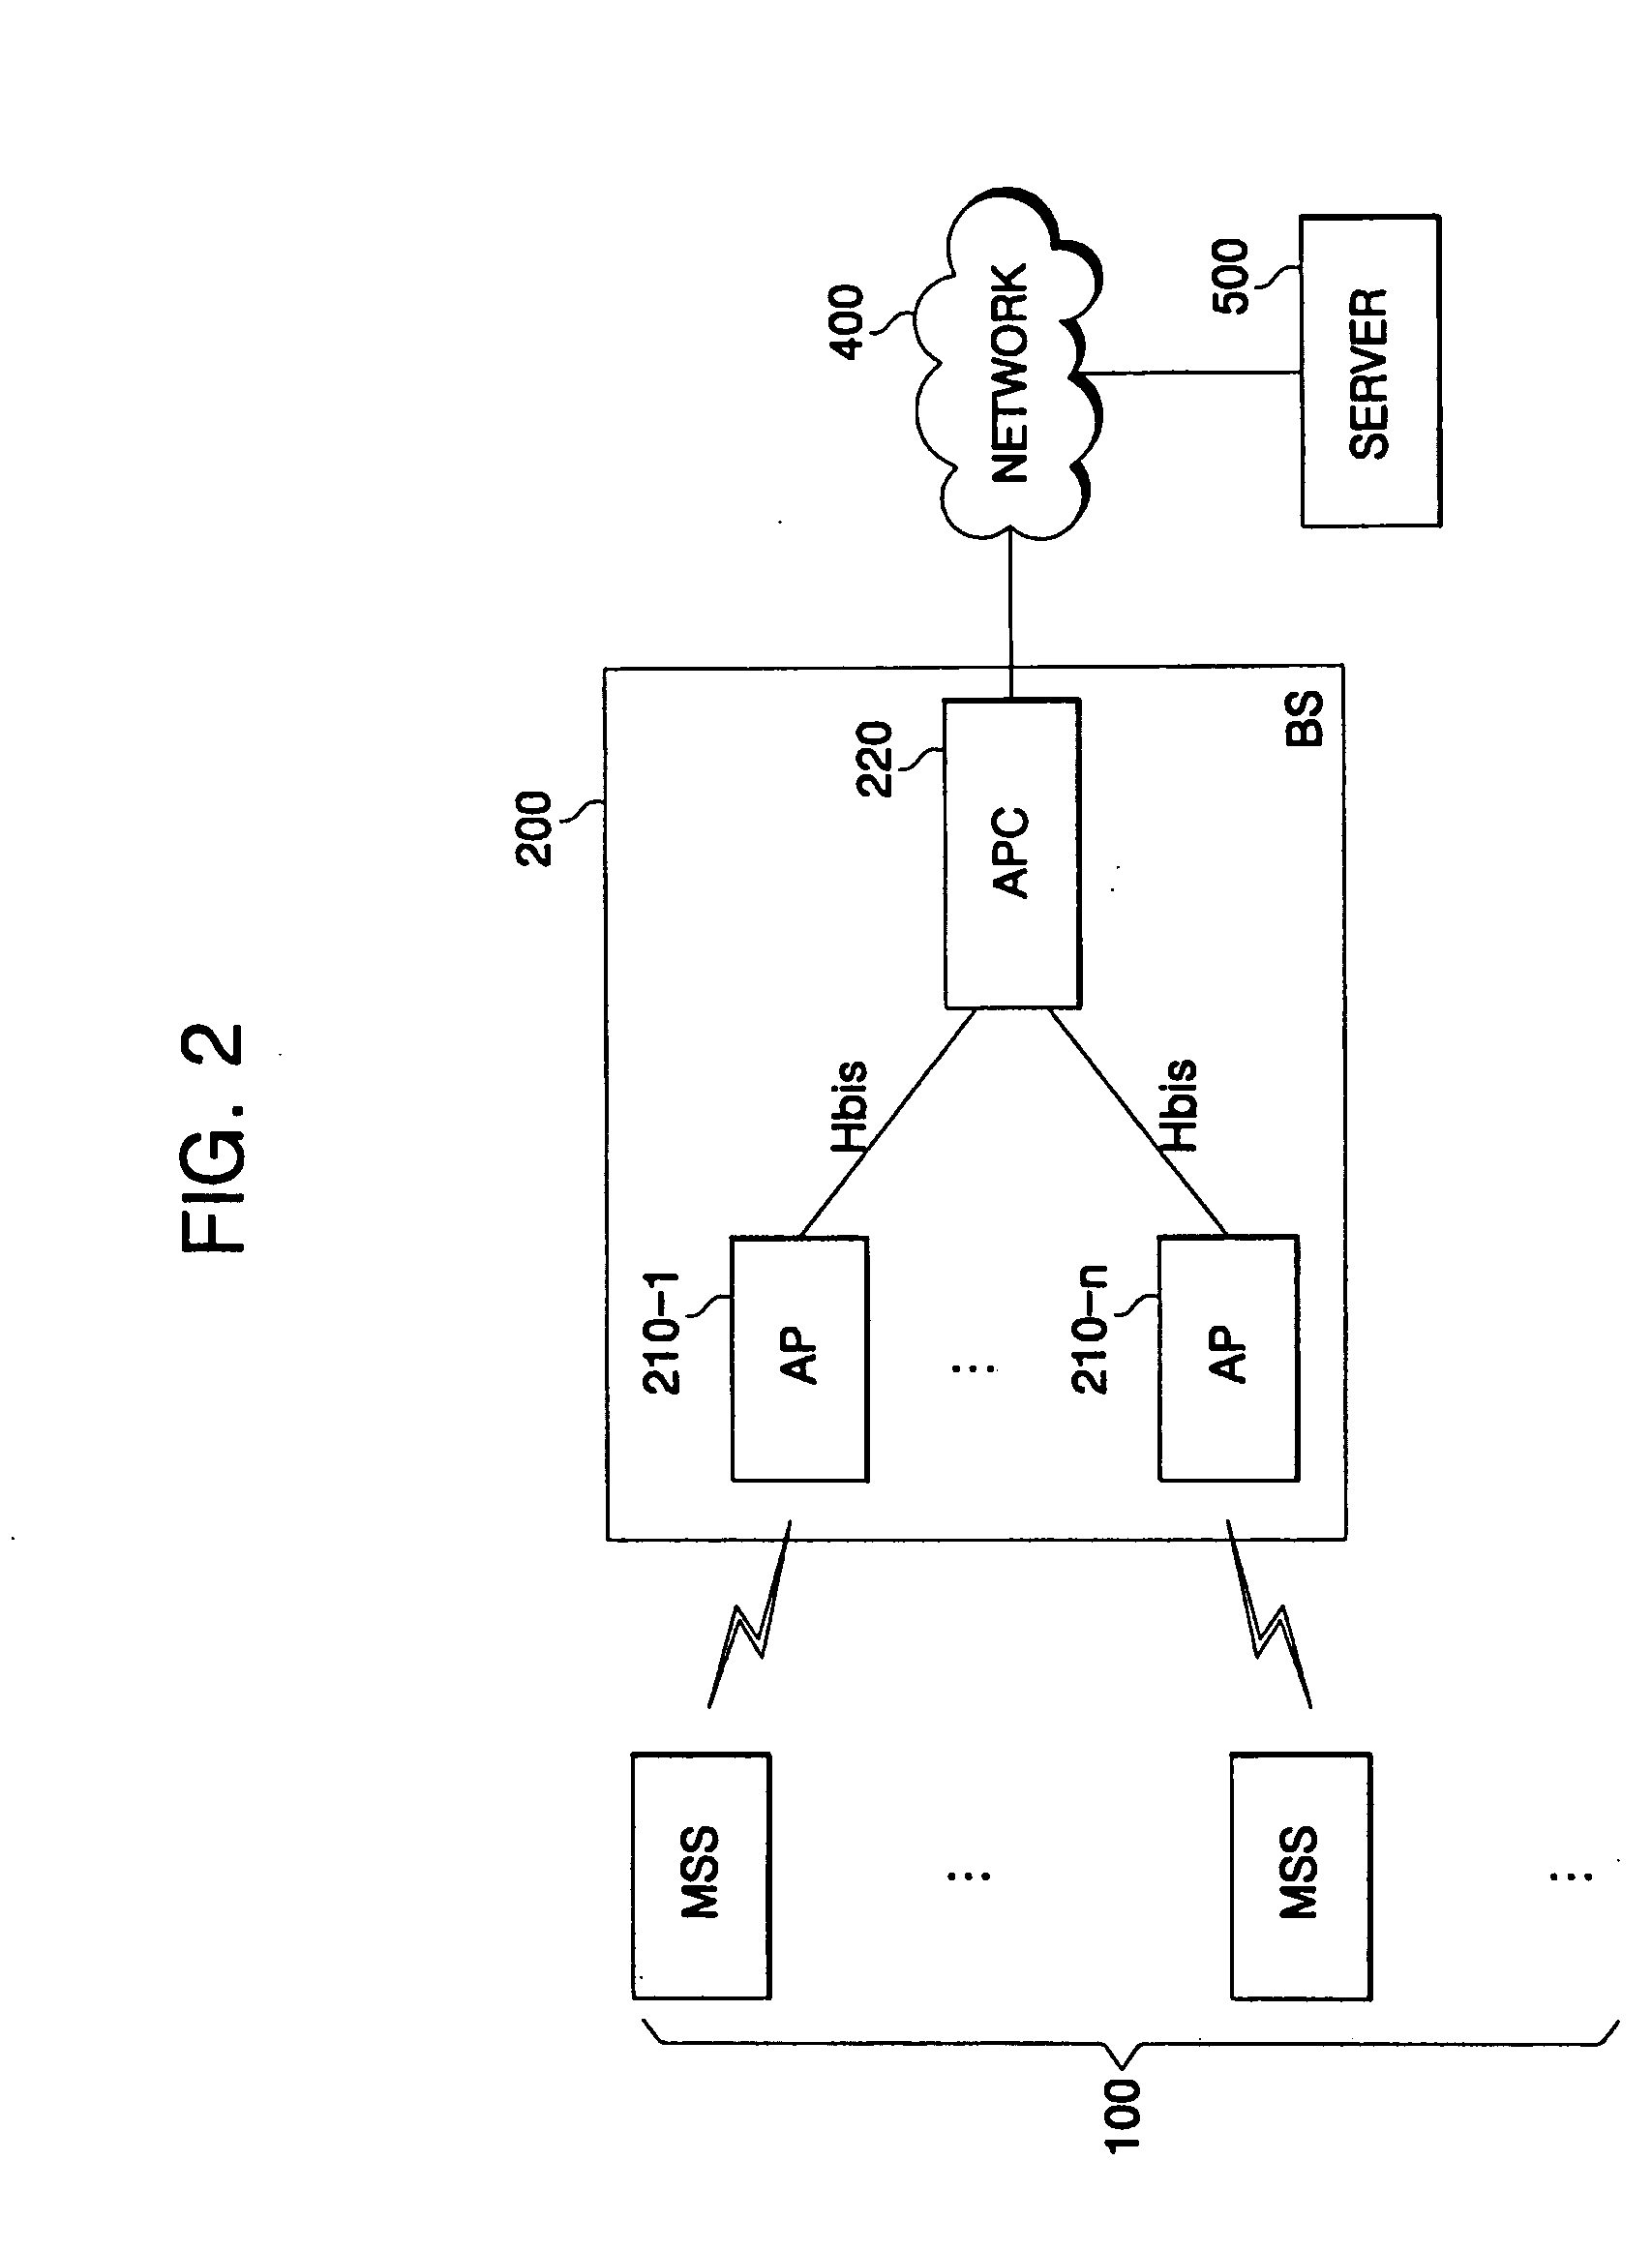 Packet processing apparatus and method in a portable Internet system